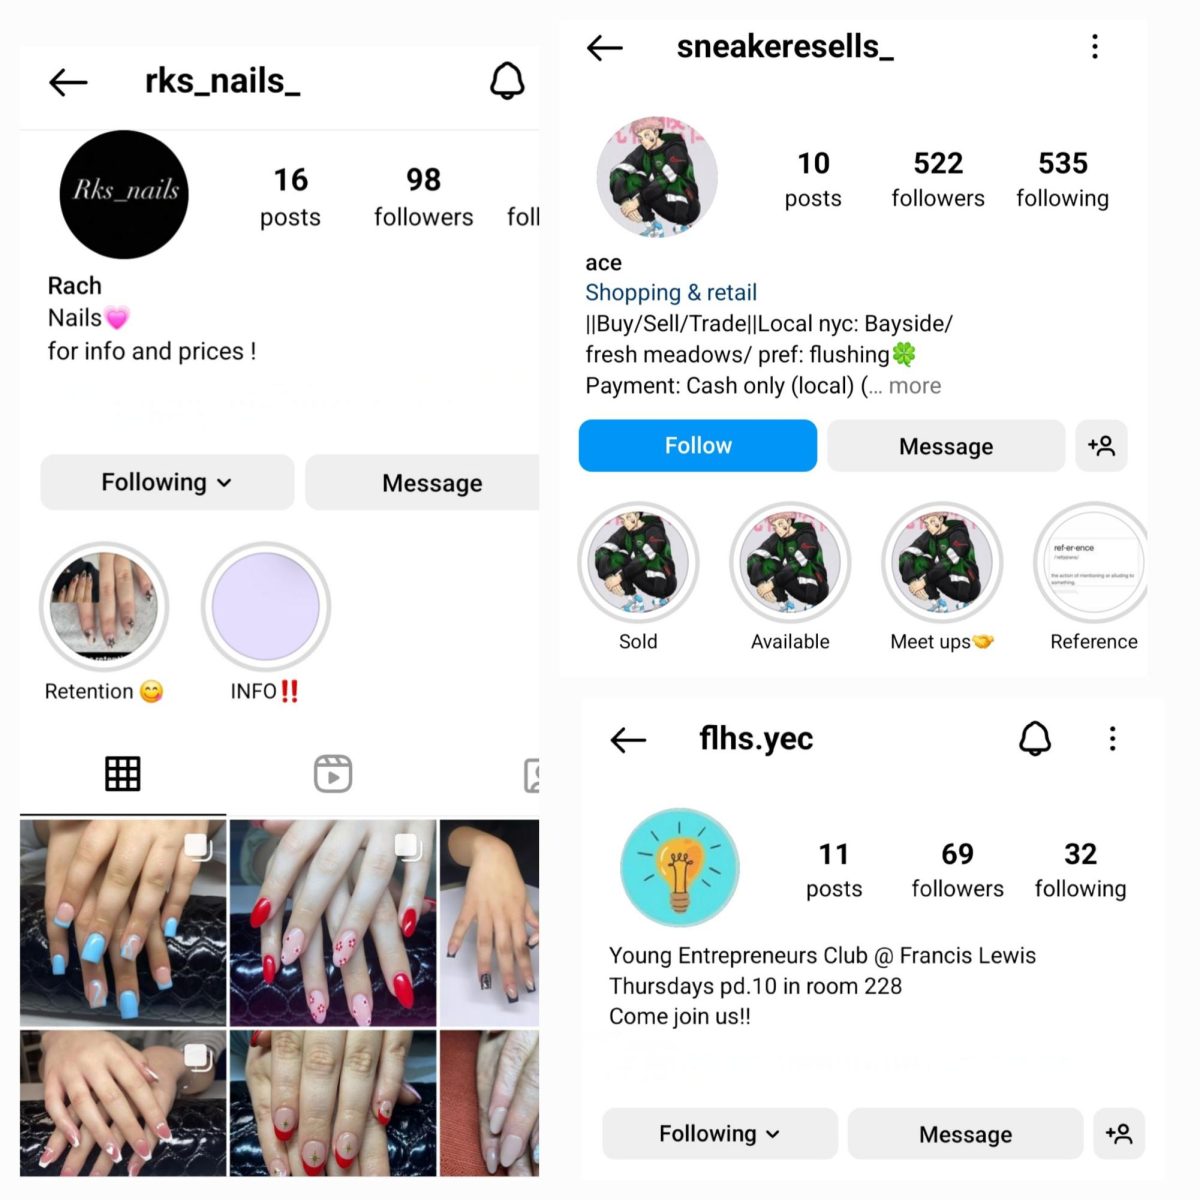 Students can find Kaykovs nail business, Yaps reselling business and Yans club on Instagram.